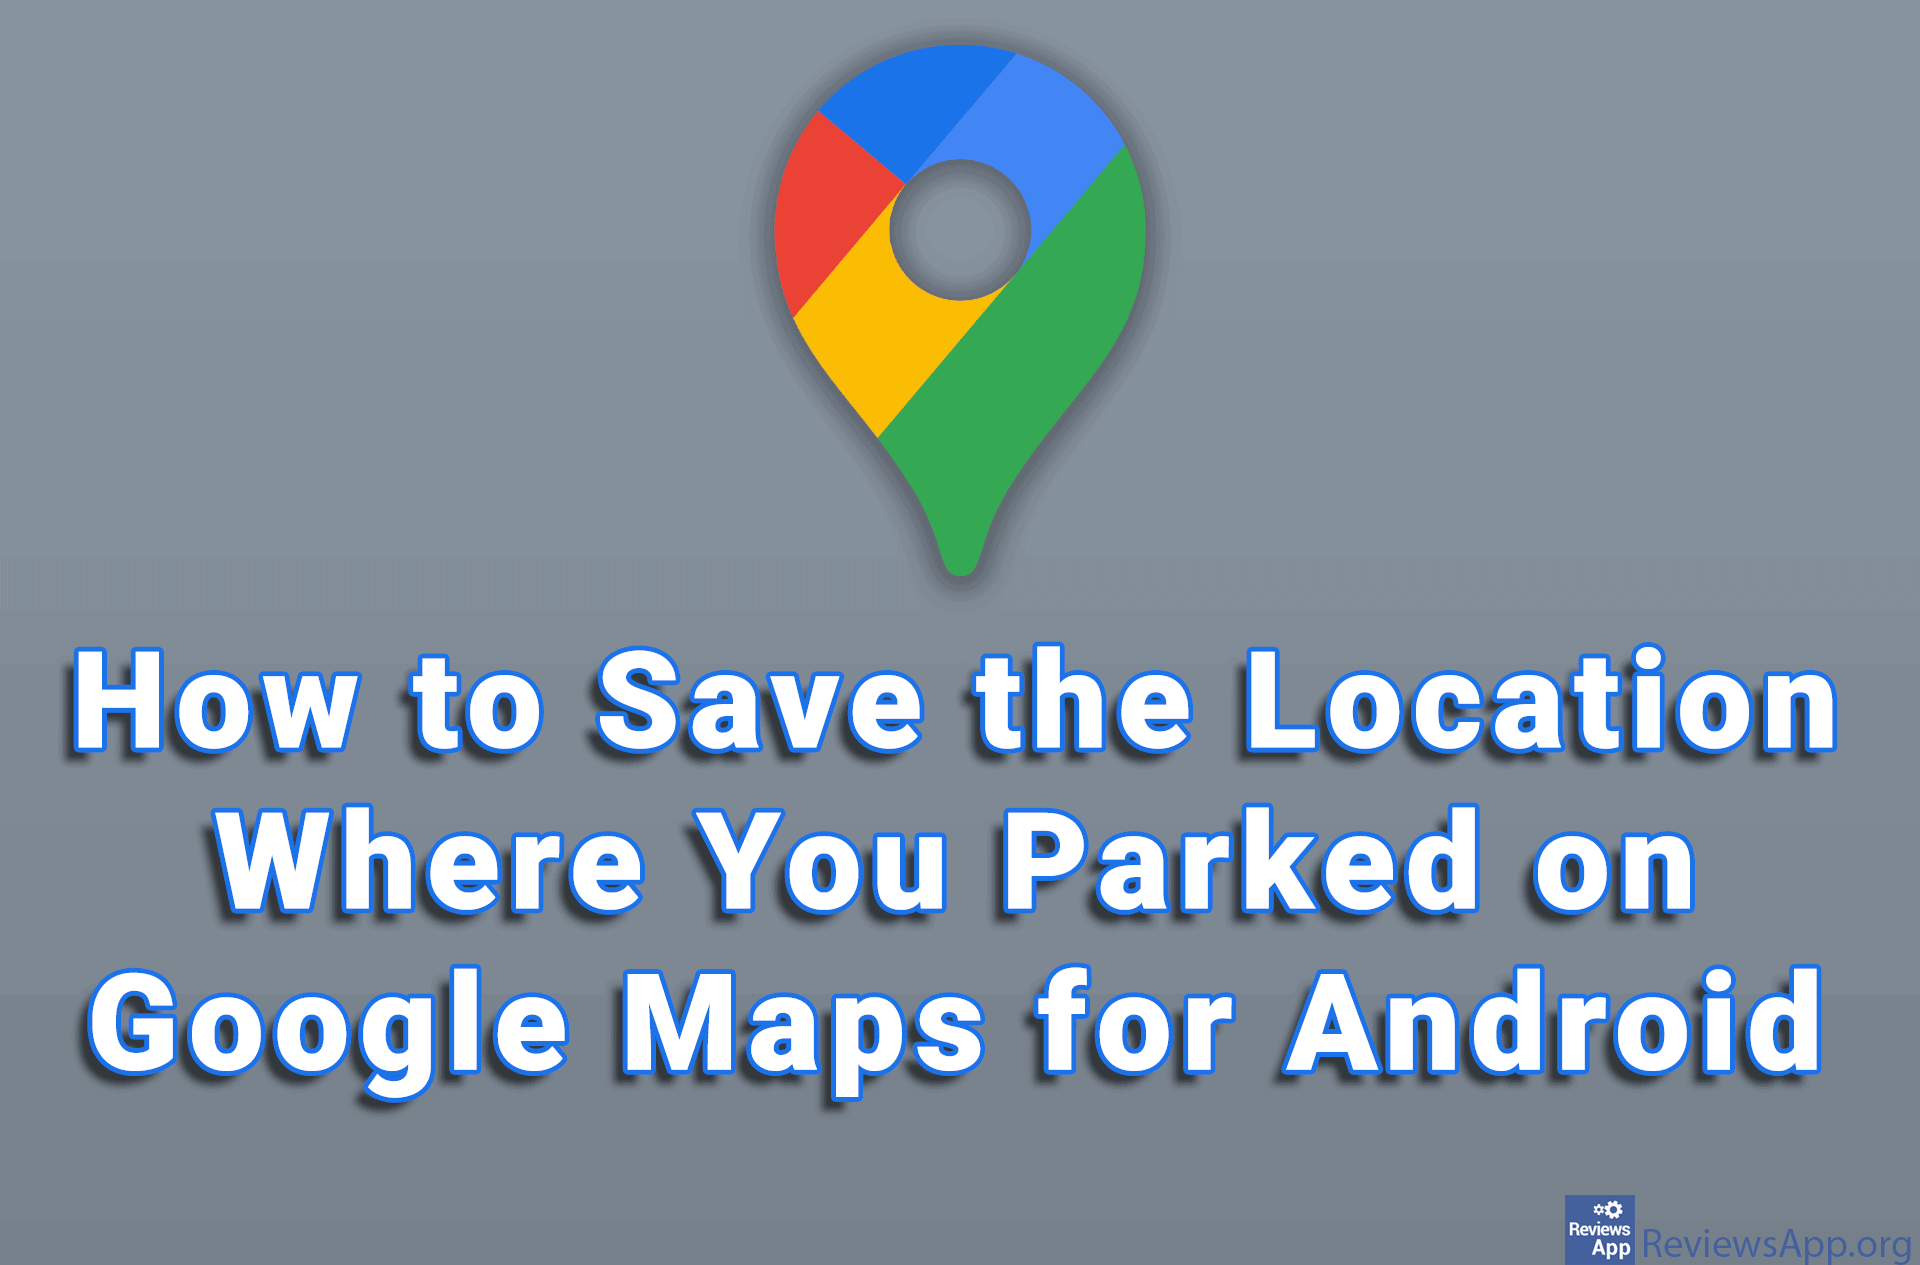 How to Save the Location Where You Parked on Google Maps for Android